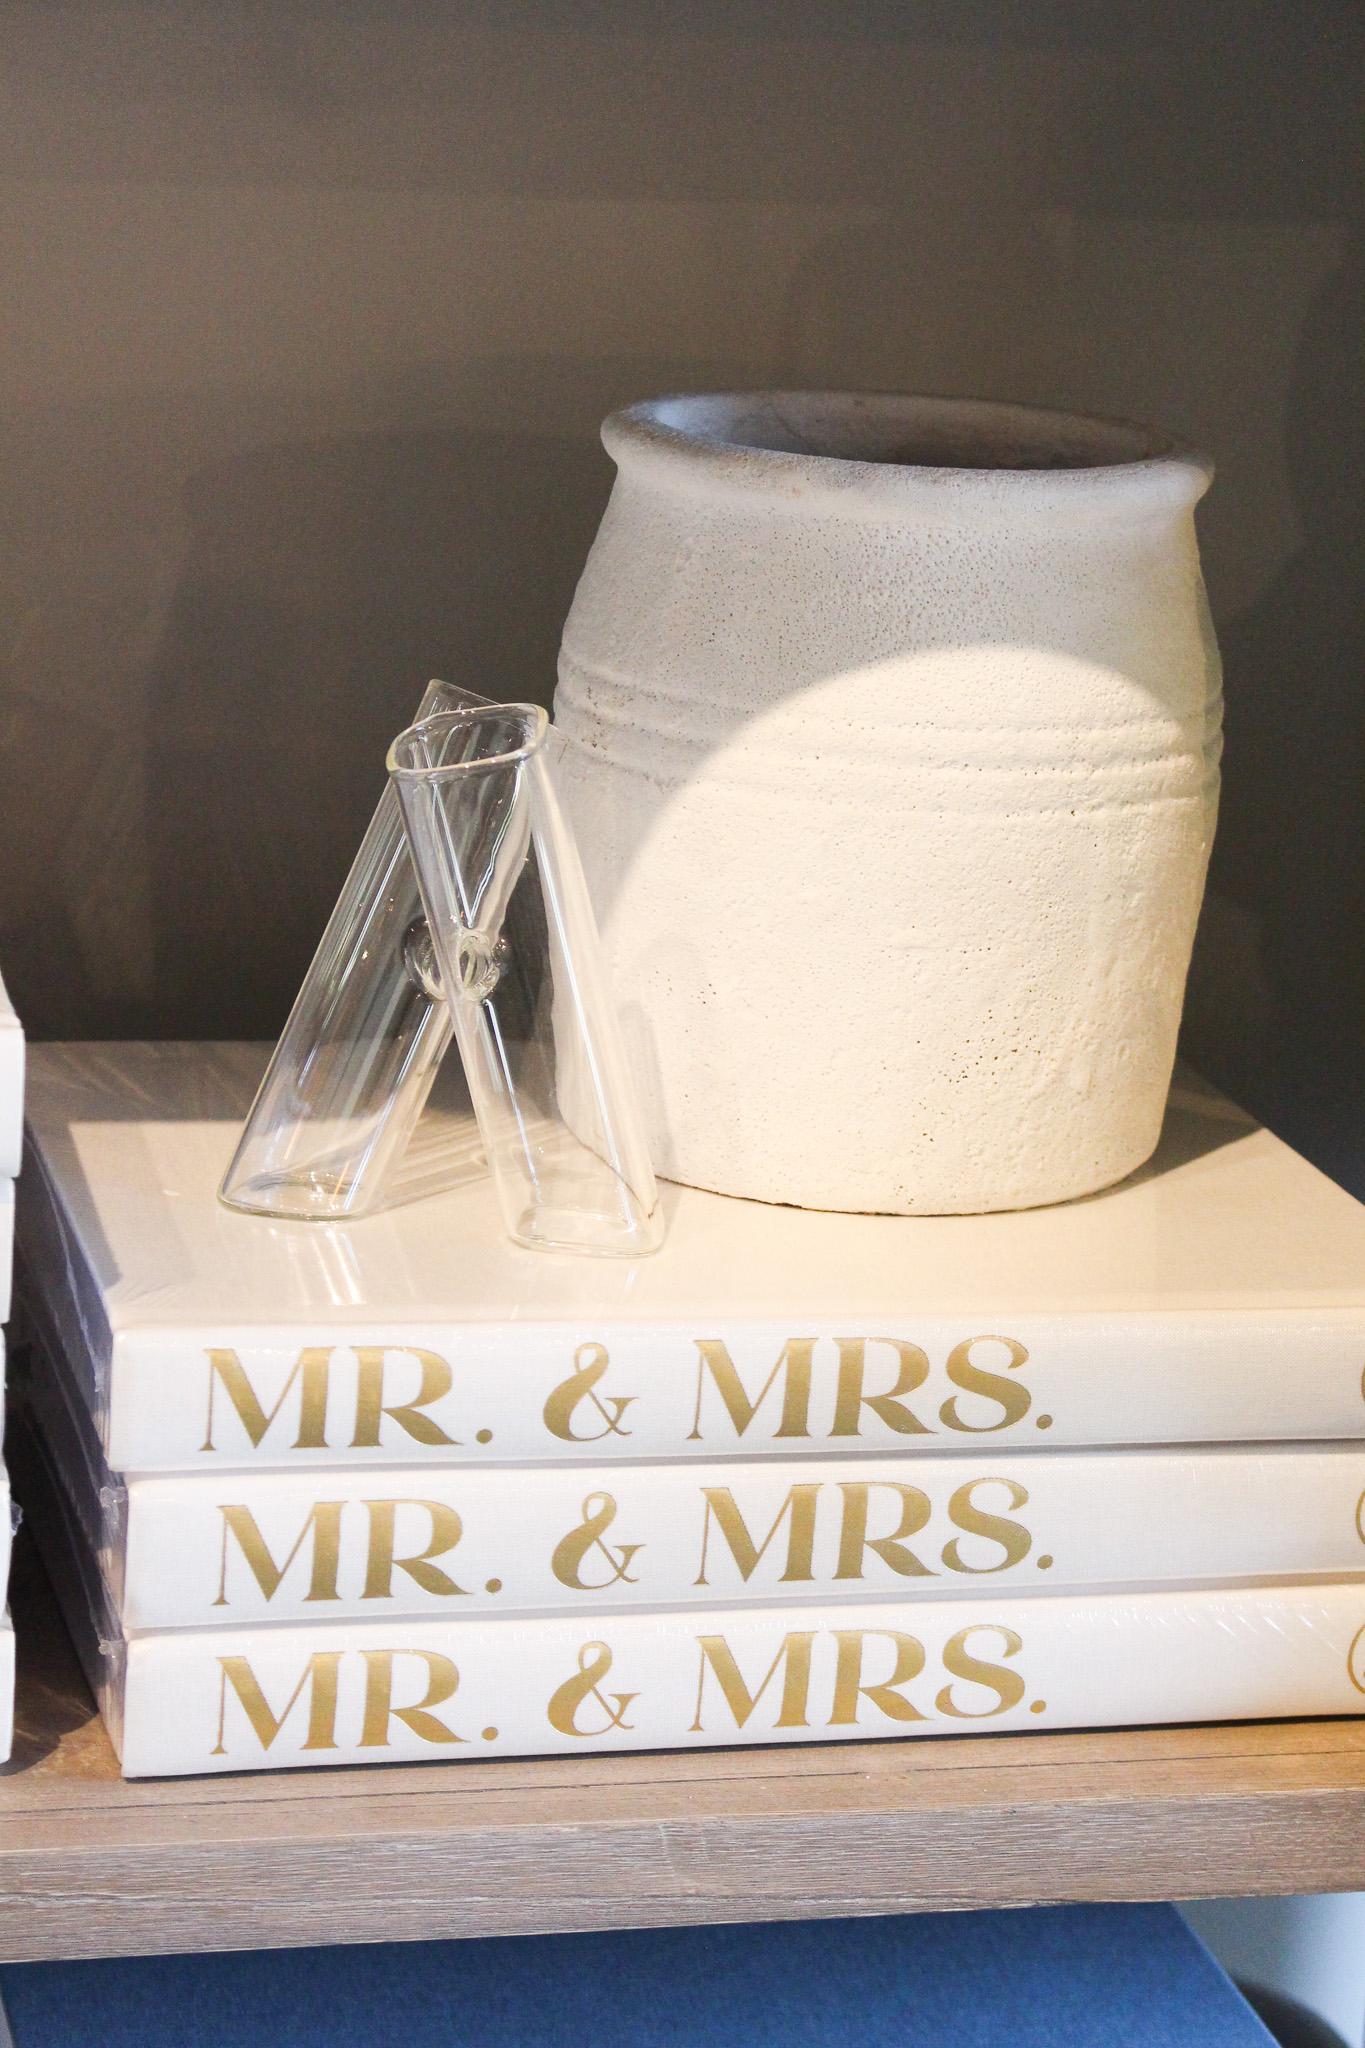 Mr. & Mrs. Coffee Table Book